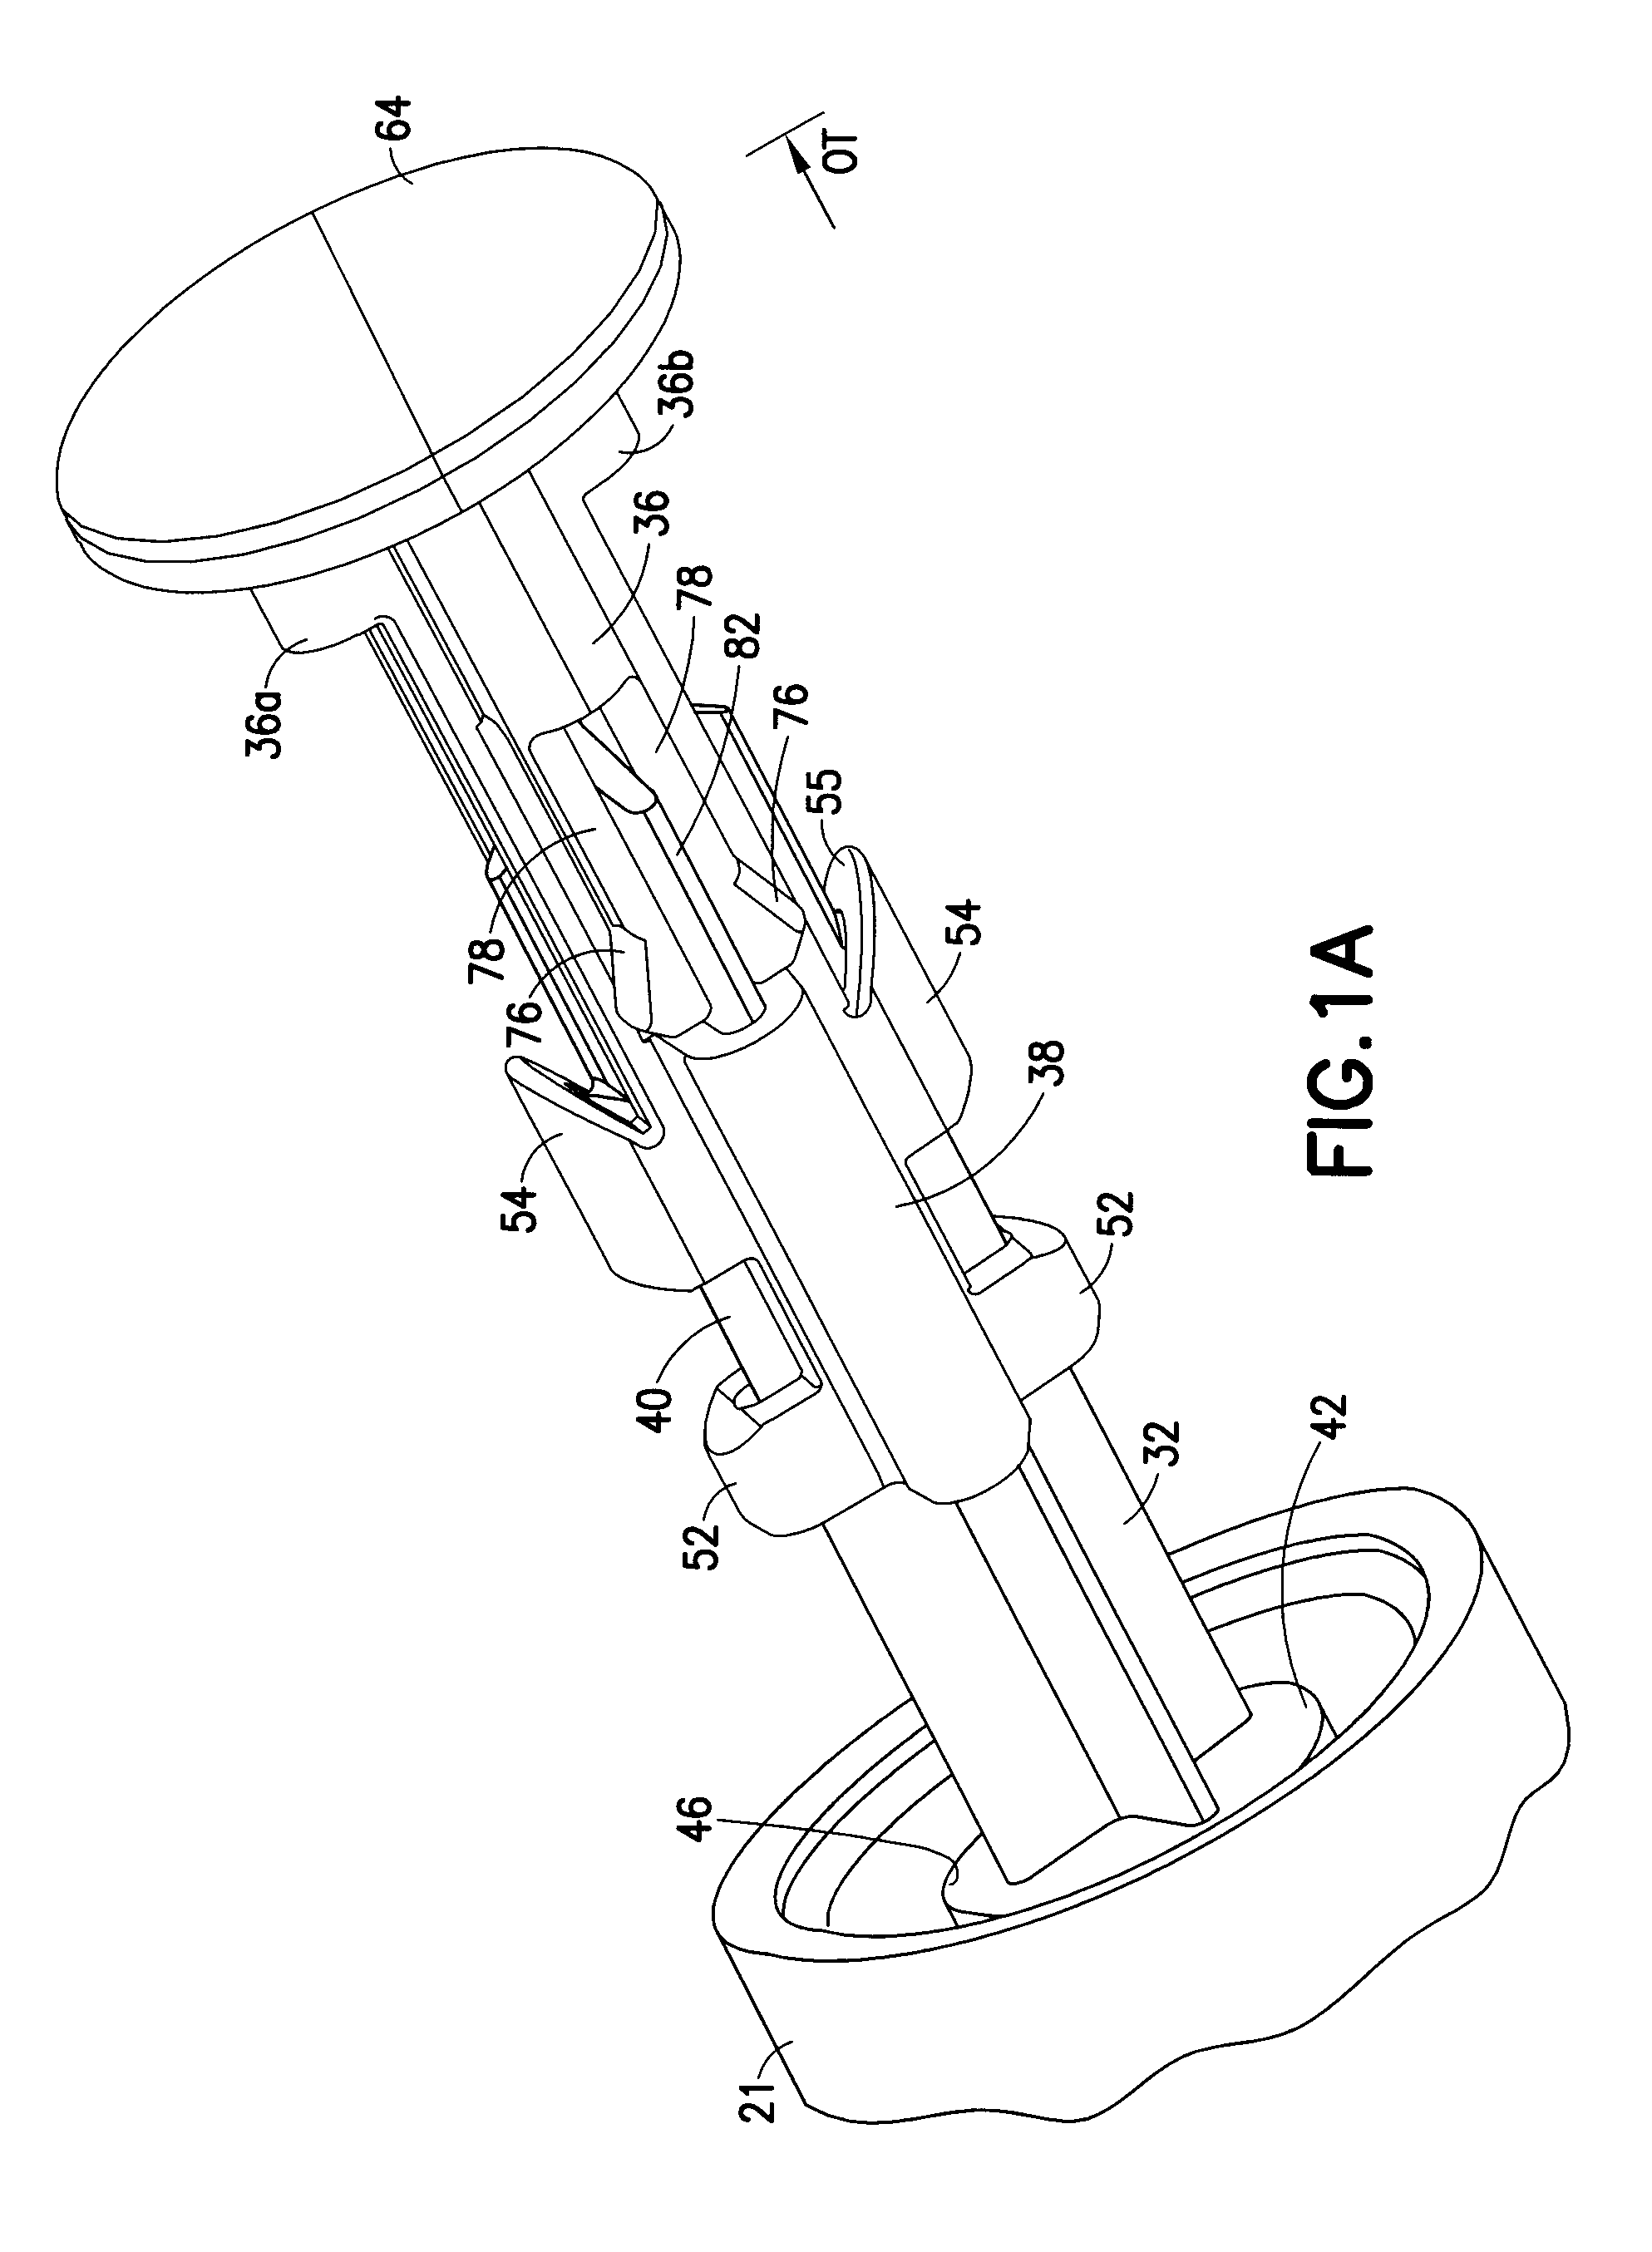 Syringe Assembly Having a Telescoping Plunger Rod